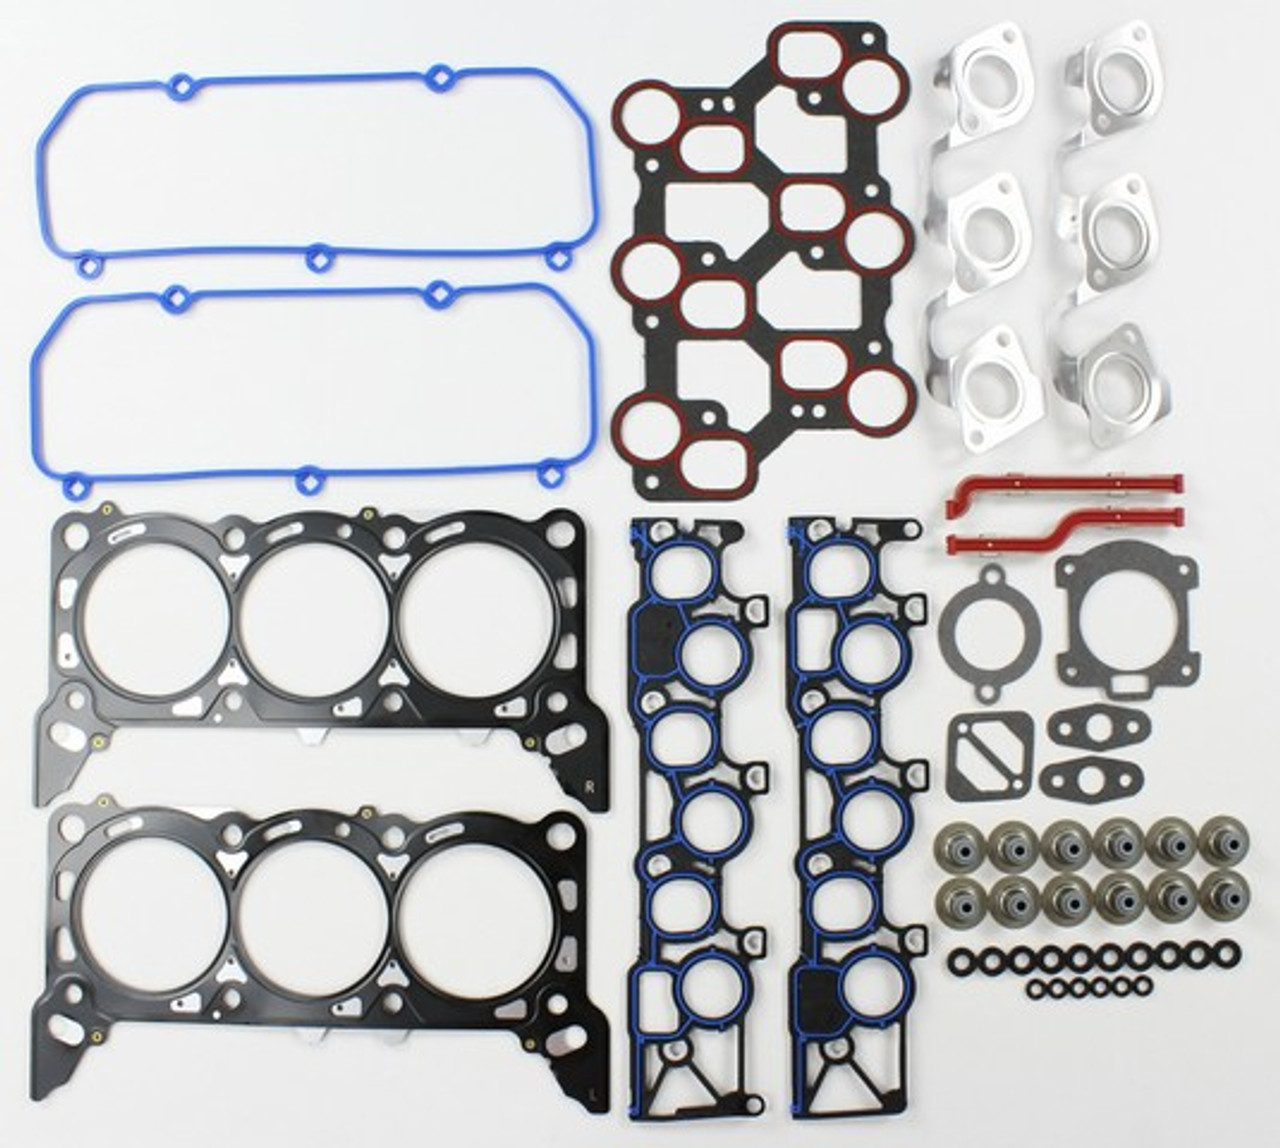 2004 Ford Mustang 3.8L Head Gasket Set HGS4120.E18